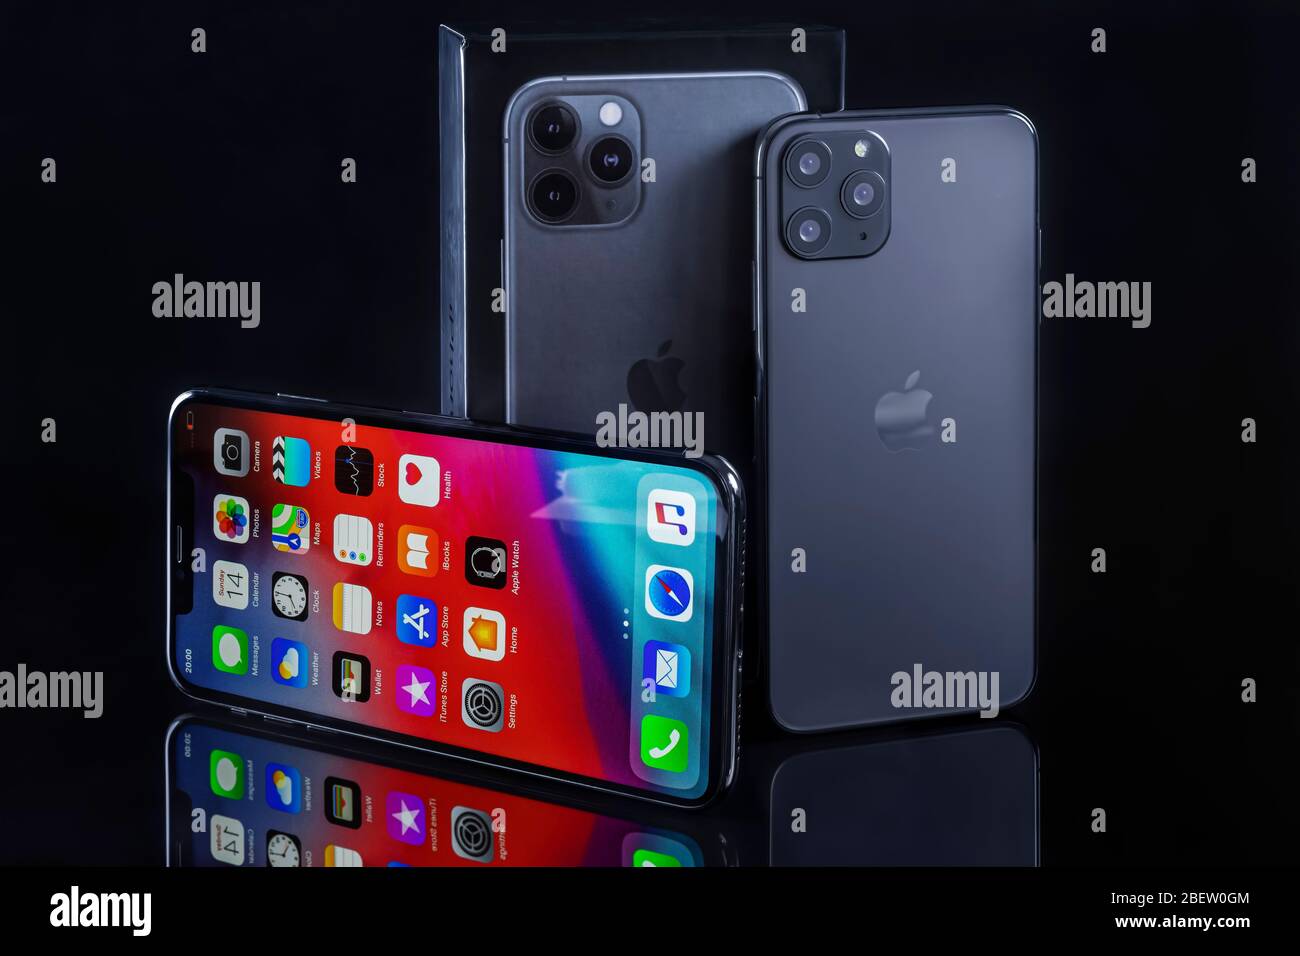 Galati, Romania - March 23, 2020: Apple launch the new smartphone iPhone 11 Pro and iPhone XS Max. iPhone Xs Max front view and iPhone 11 Pro back vie Stock Photo